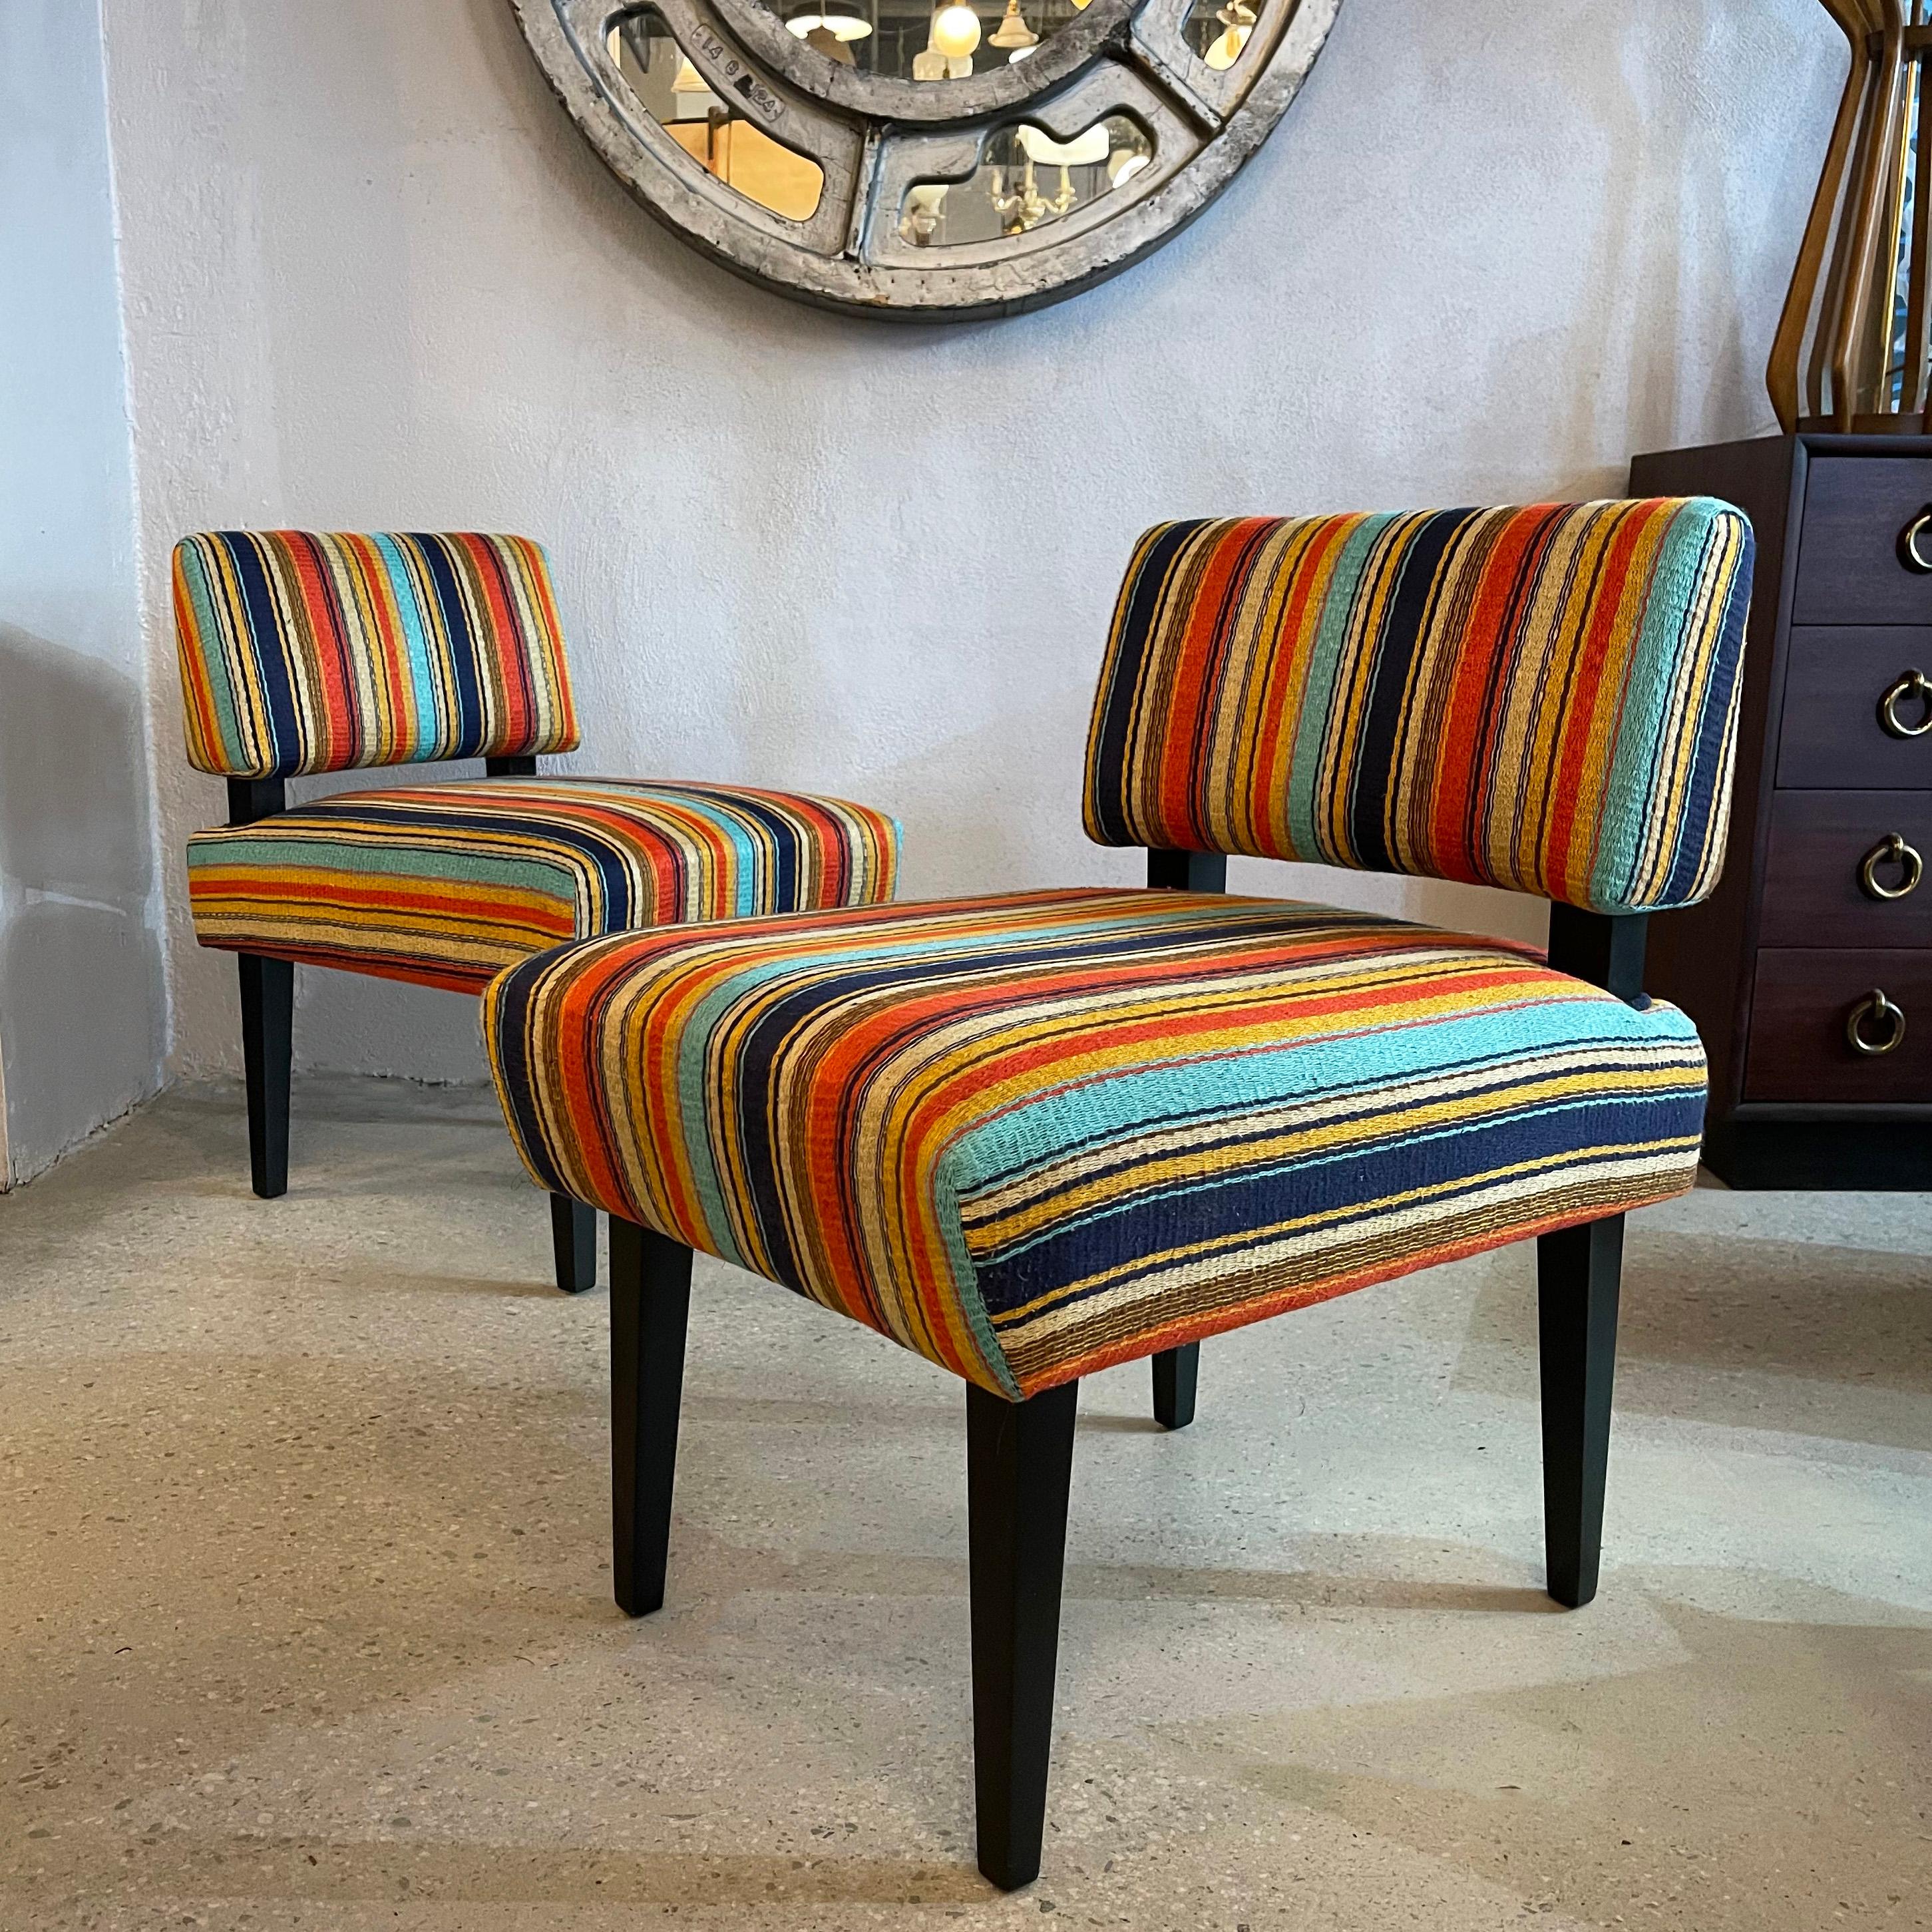 Pair of minimal, low profile, slipper chairs designed and made by cityFoundry in Brooklyn, NY for our cFsignature line of vintage inspired pieces feature lacquered maple frames with fully upholstered seats and backs in vibrant multi-color, uneven